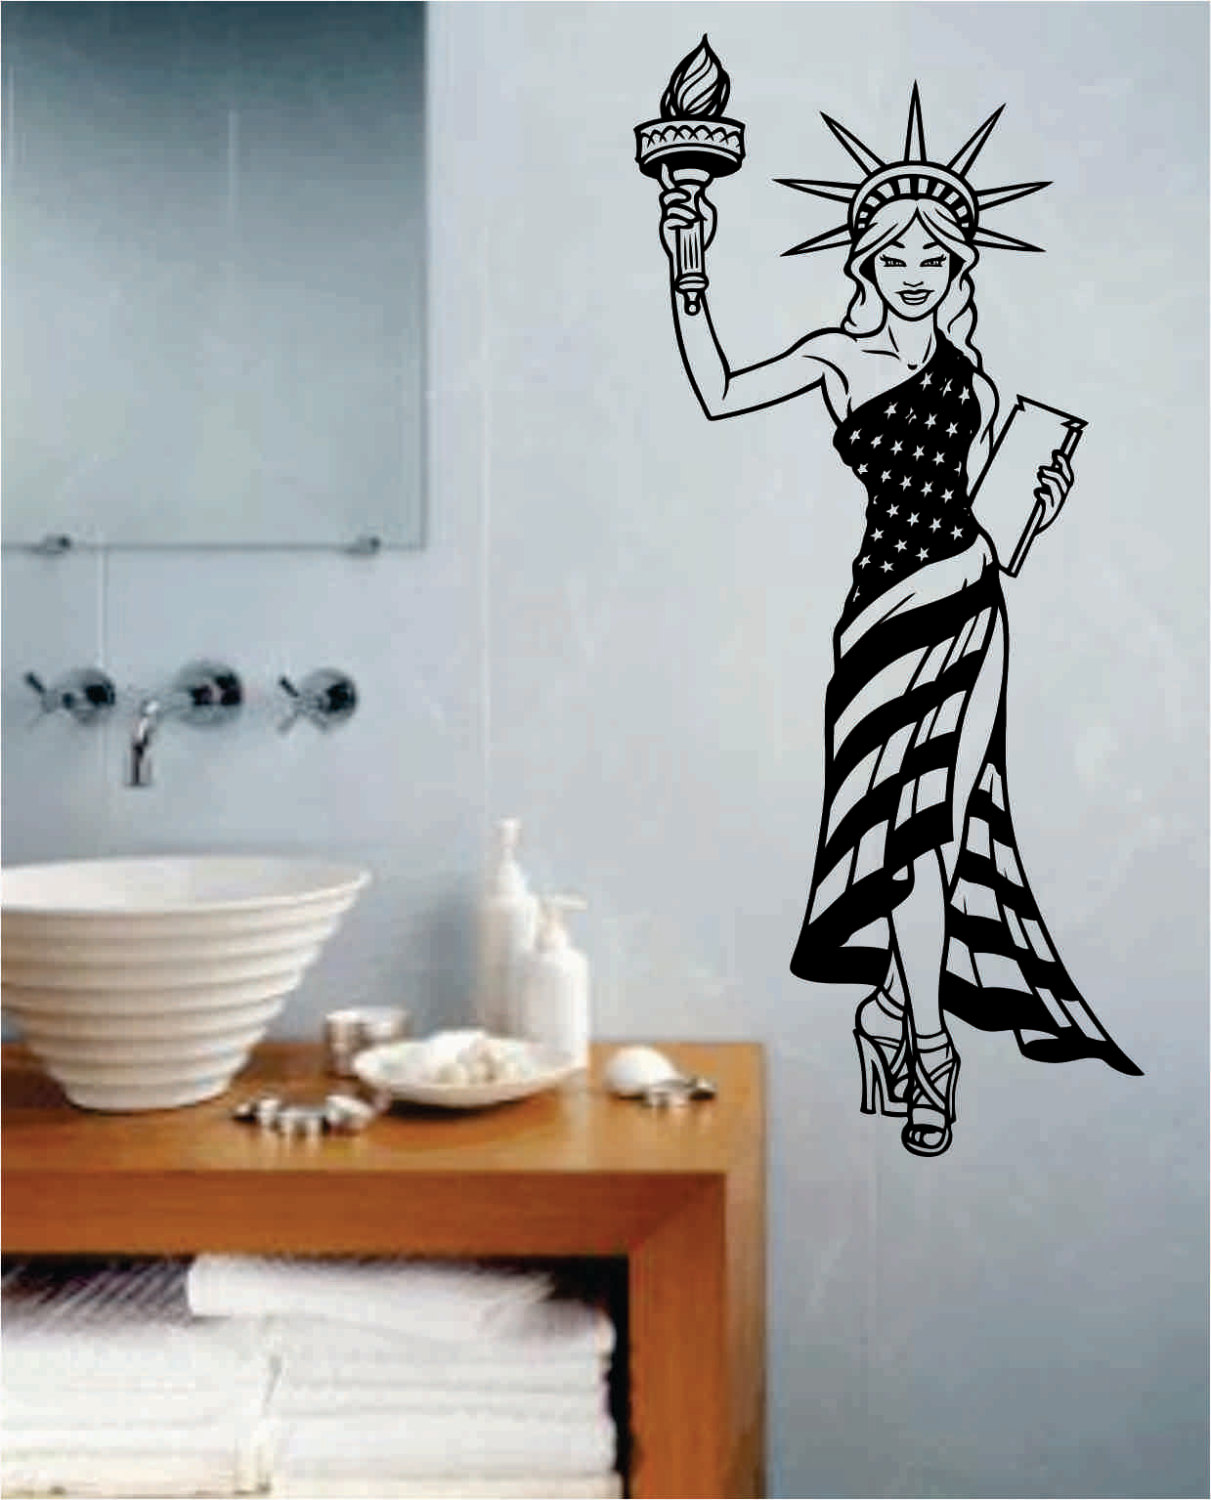 Statue of Liberty Pin Up Girl Wall Decal Sticker Art Graphic